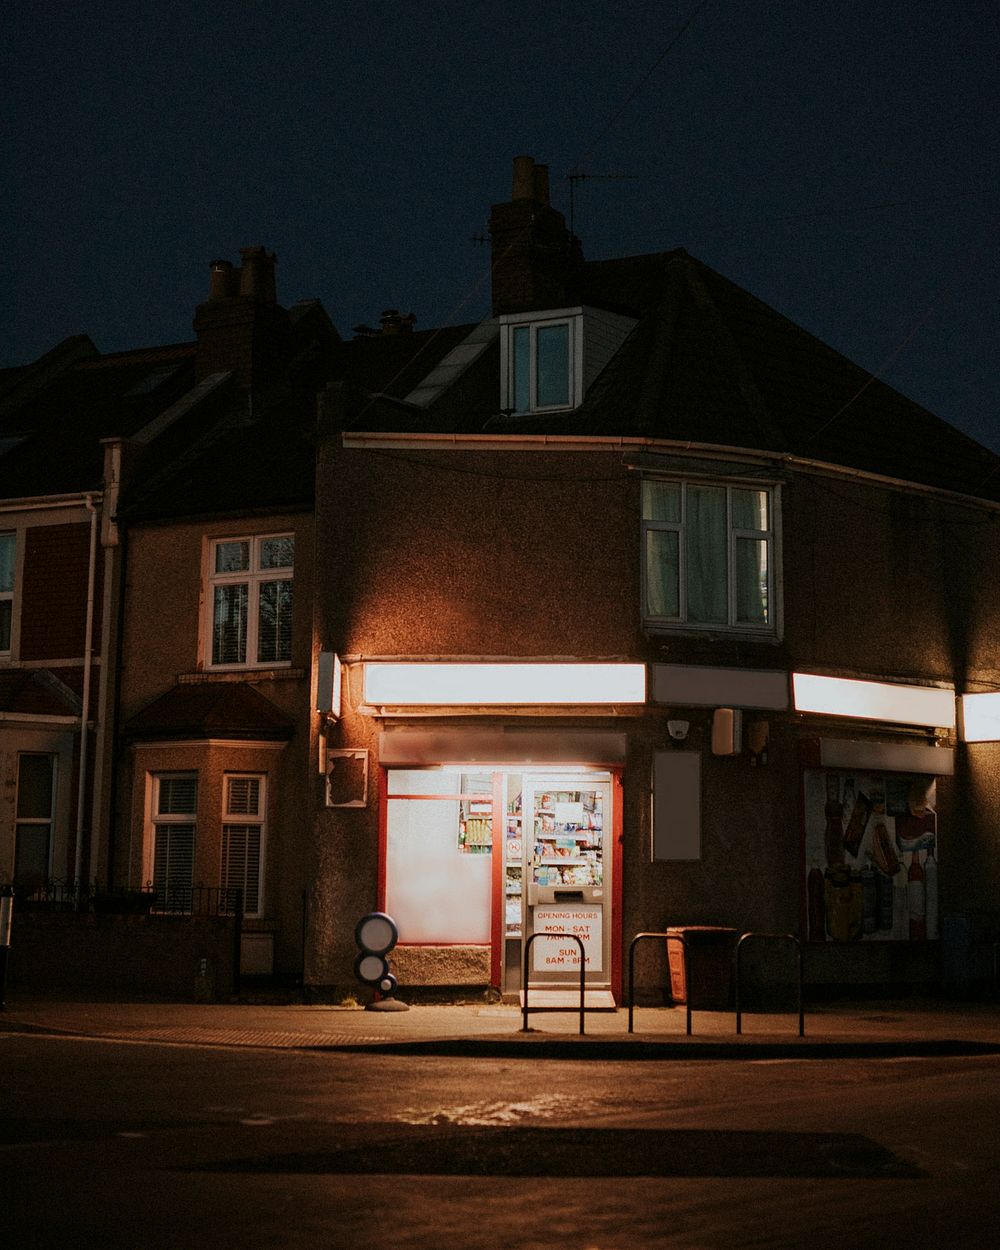 Small convenience store staying open during the covid-19 pandemic in UK